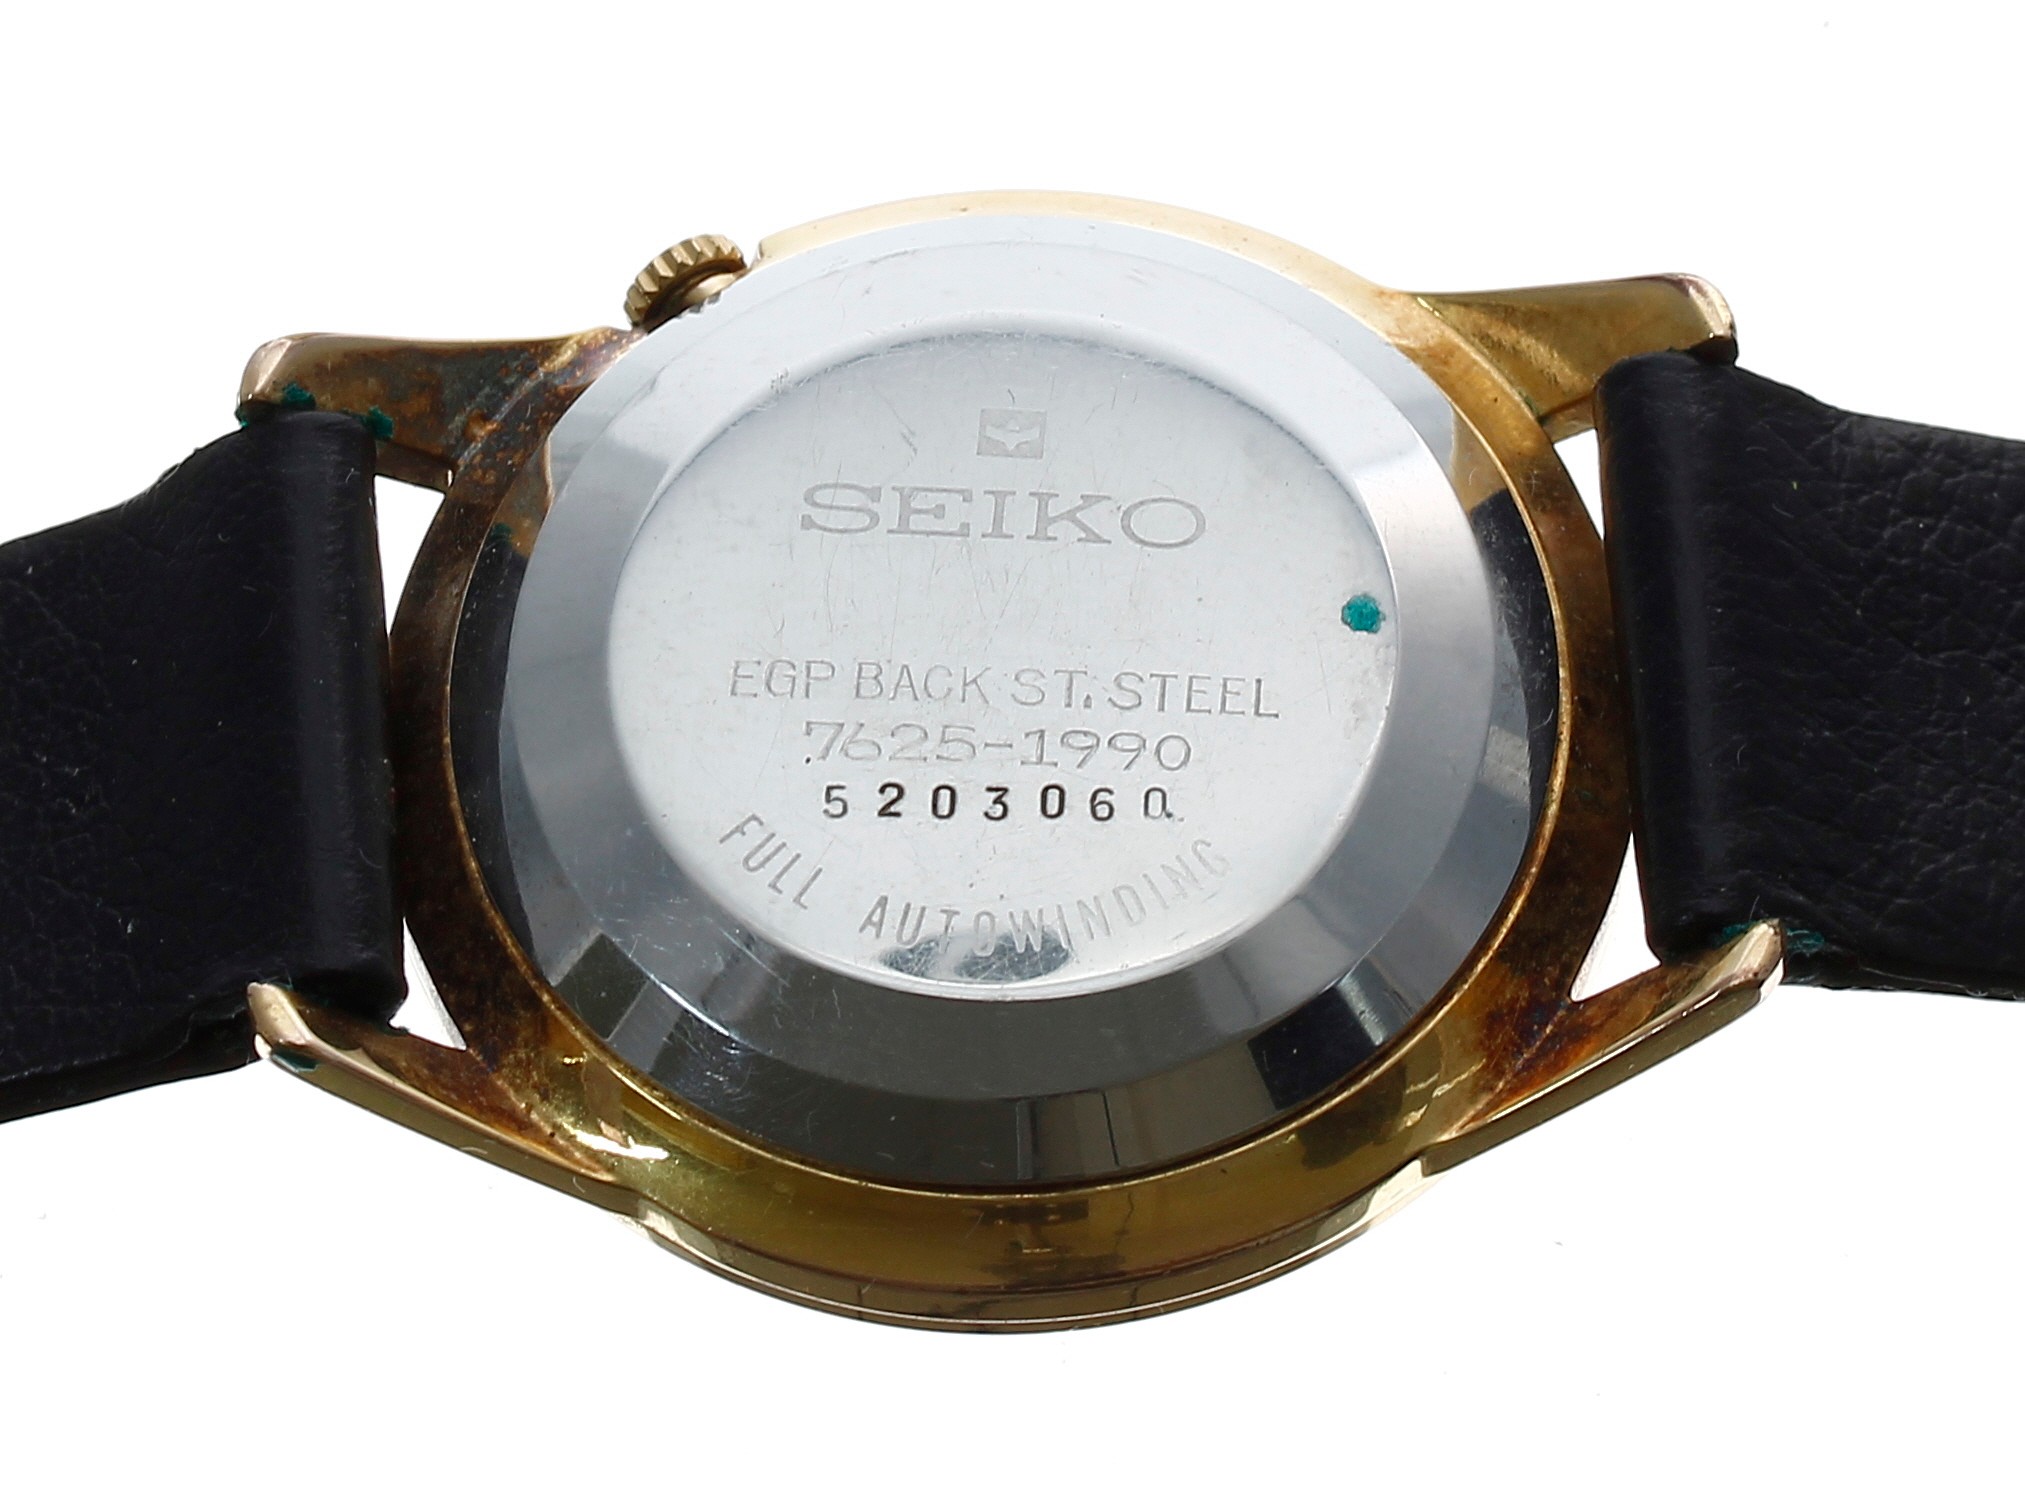 Seiko automatic gold plated and stainless steel gentleman's wristwatch, reference no. 7625-1990, - Image 2 of 2